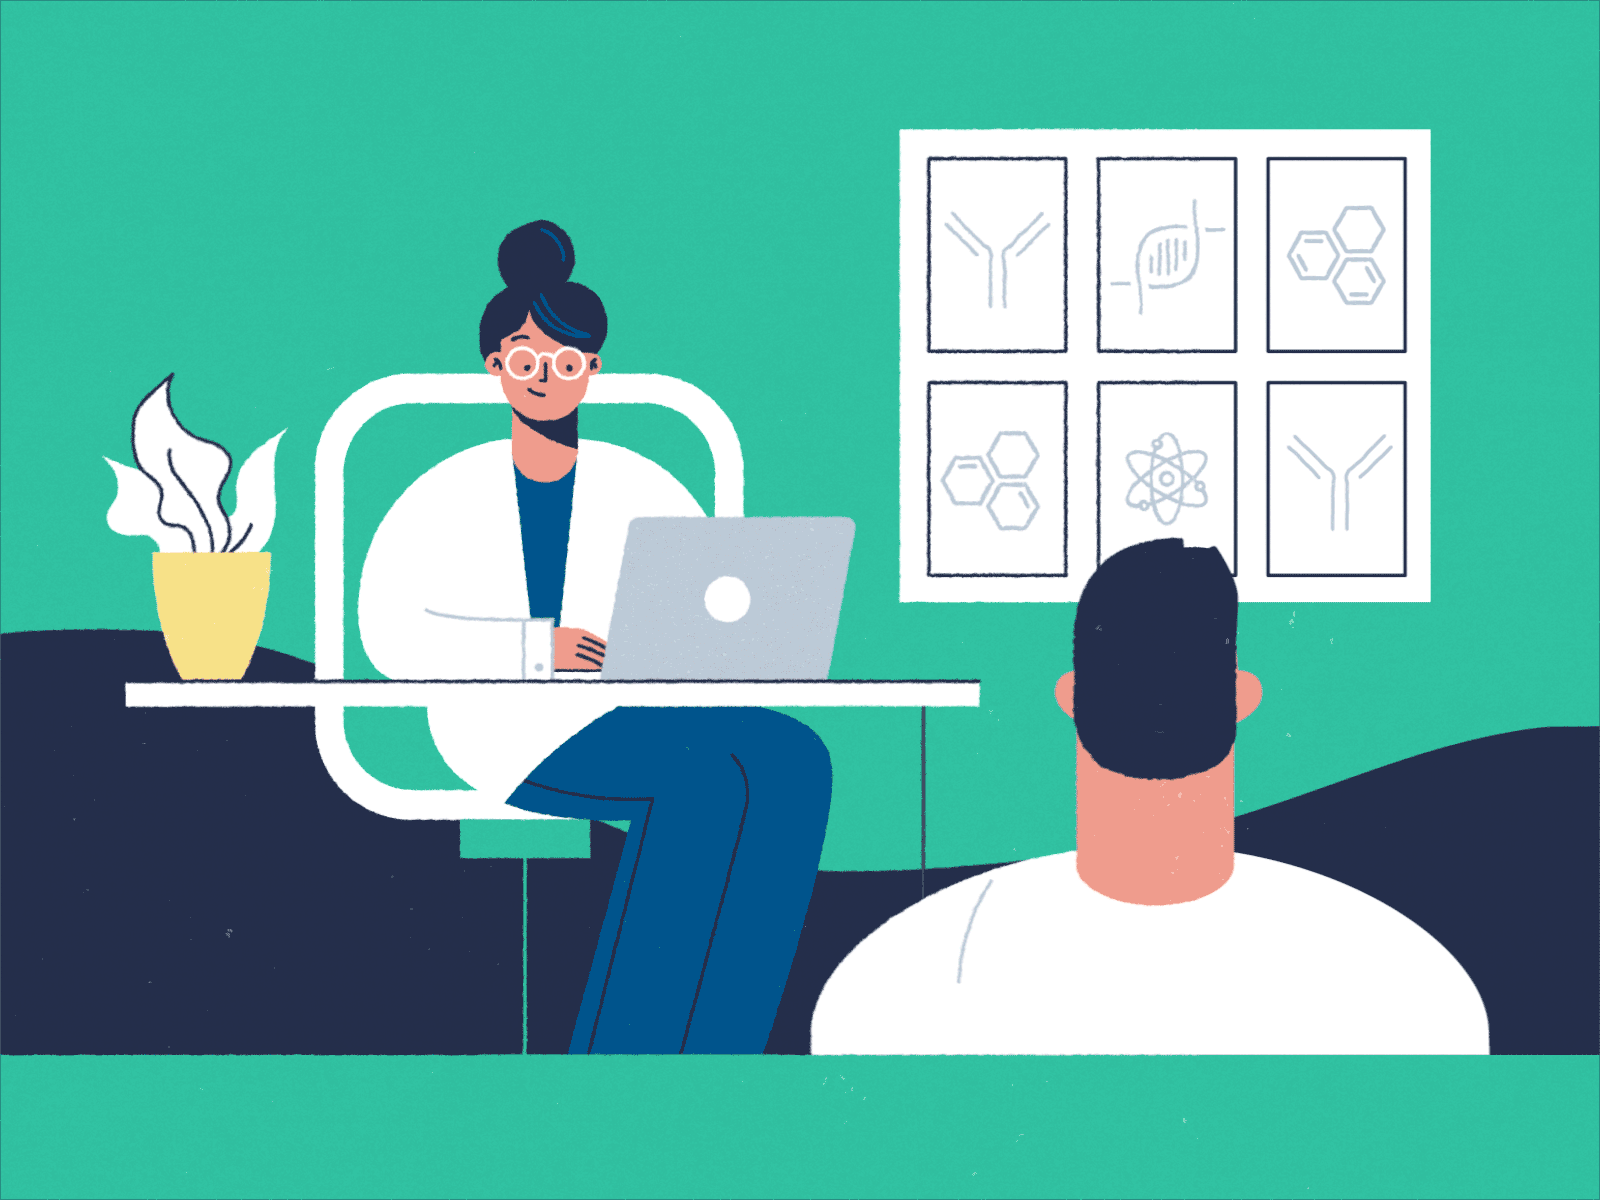 Illustration for a pharmaceutical company